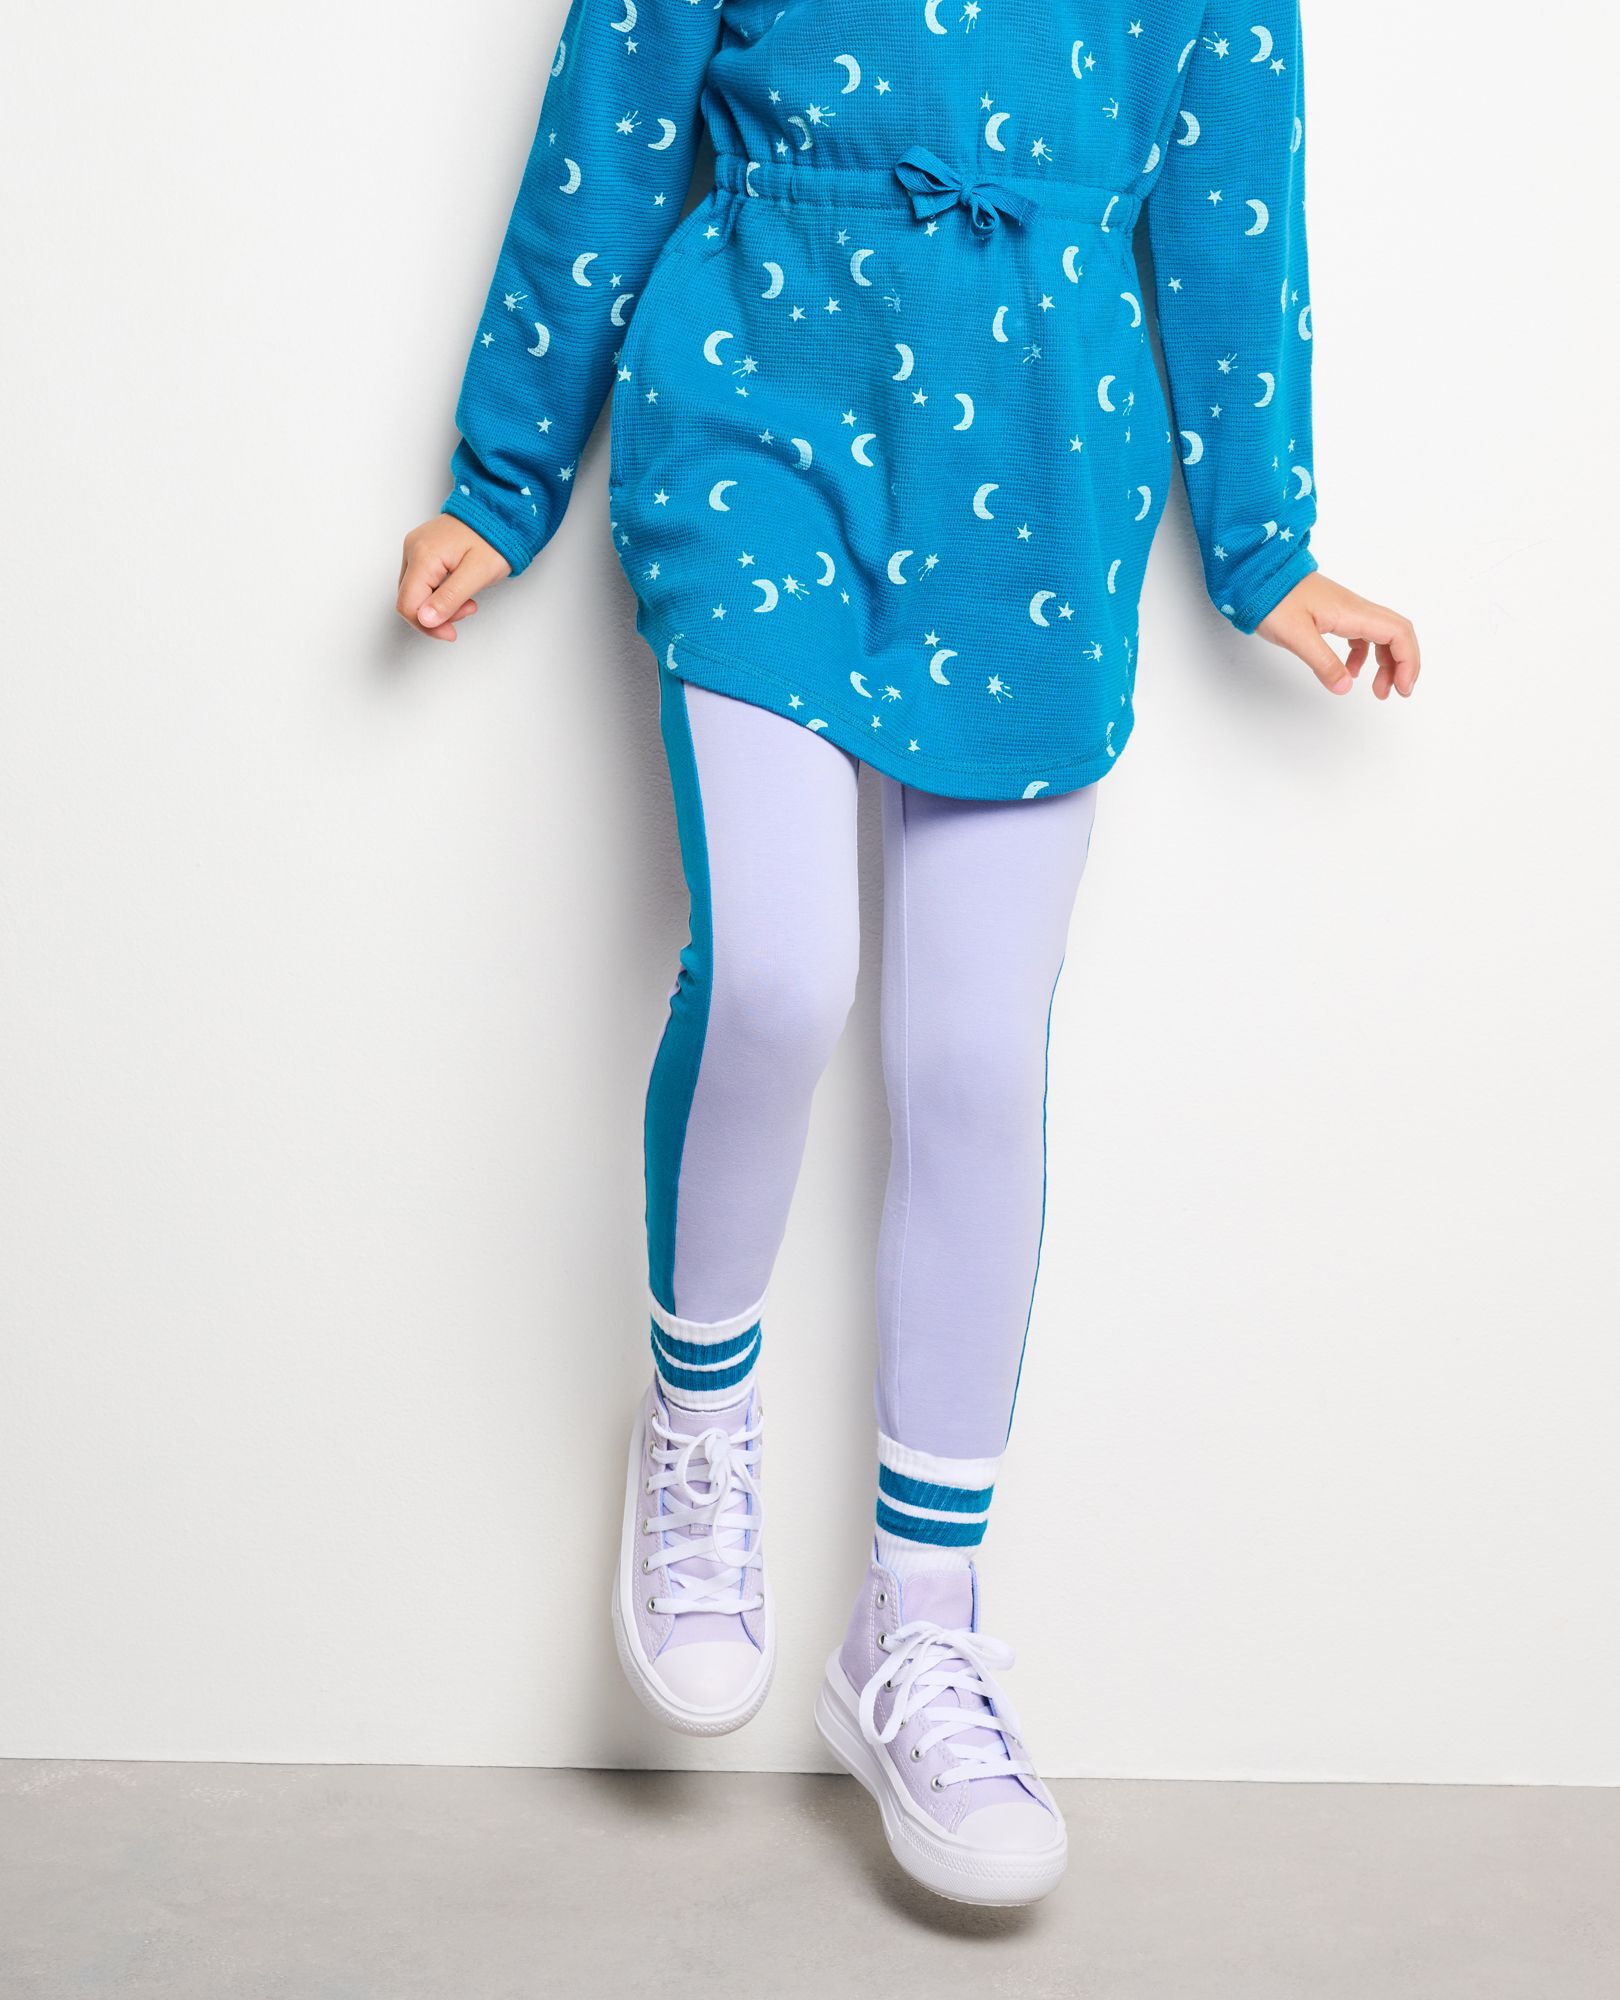 Girls Hanna Andersson 2-piece dress outfit with coordinated leggings -  Dresses